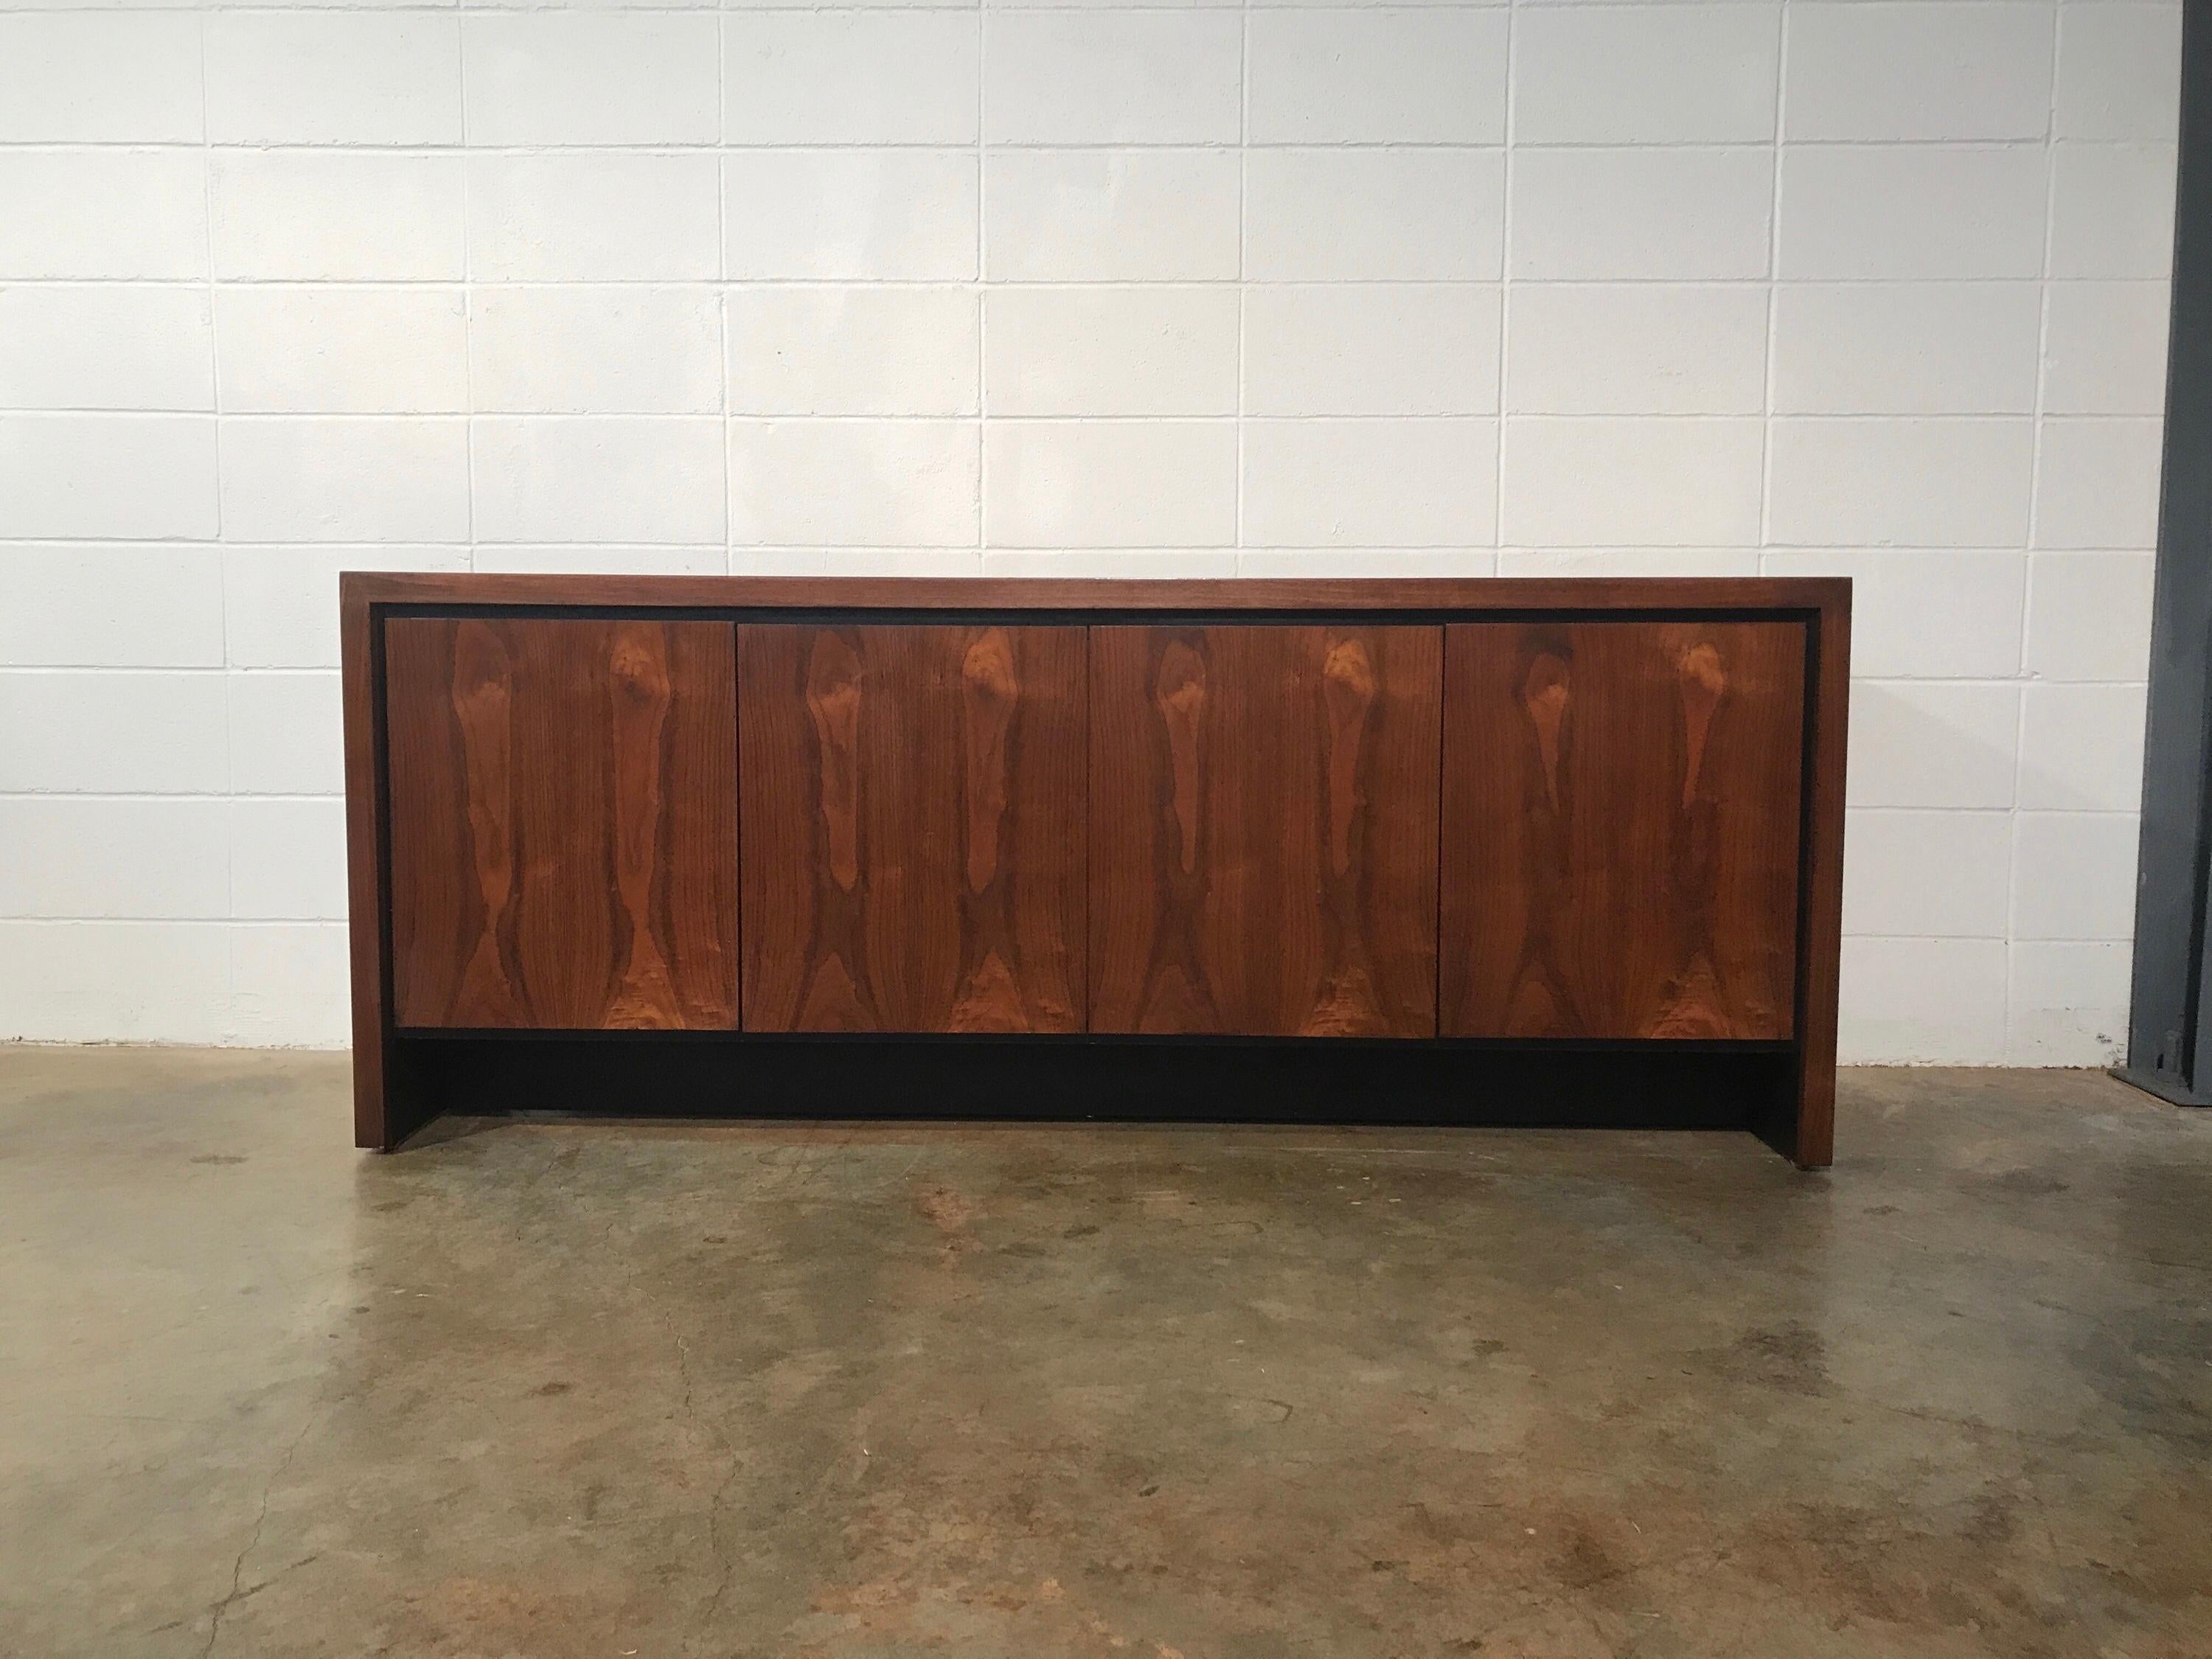 Mid-Century Modern walnut buffet / credenza by Dillingham.
Ample storage and Amazing walnut grain make this piece a must have. Great original condition with minimal signs of use. A few minor scuffs but nothing that would detract from the value or